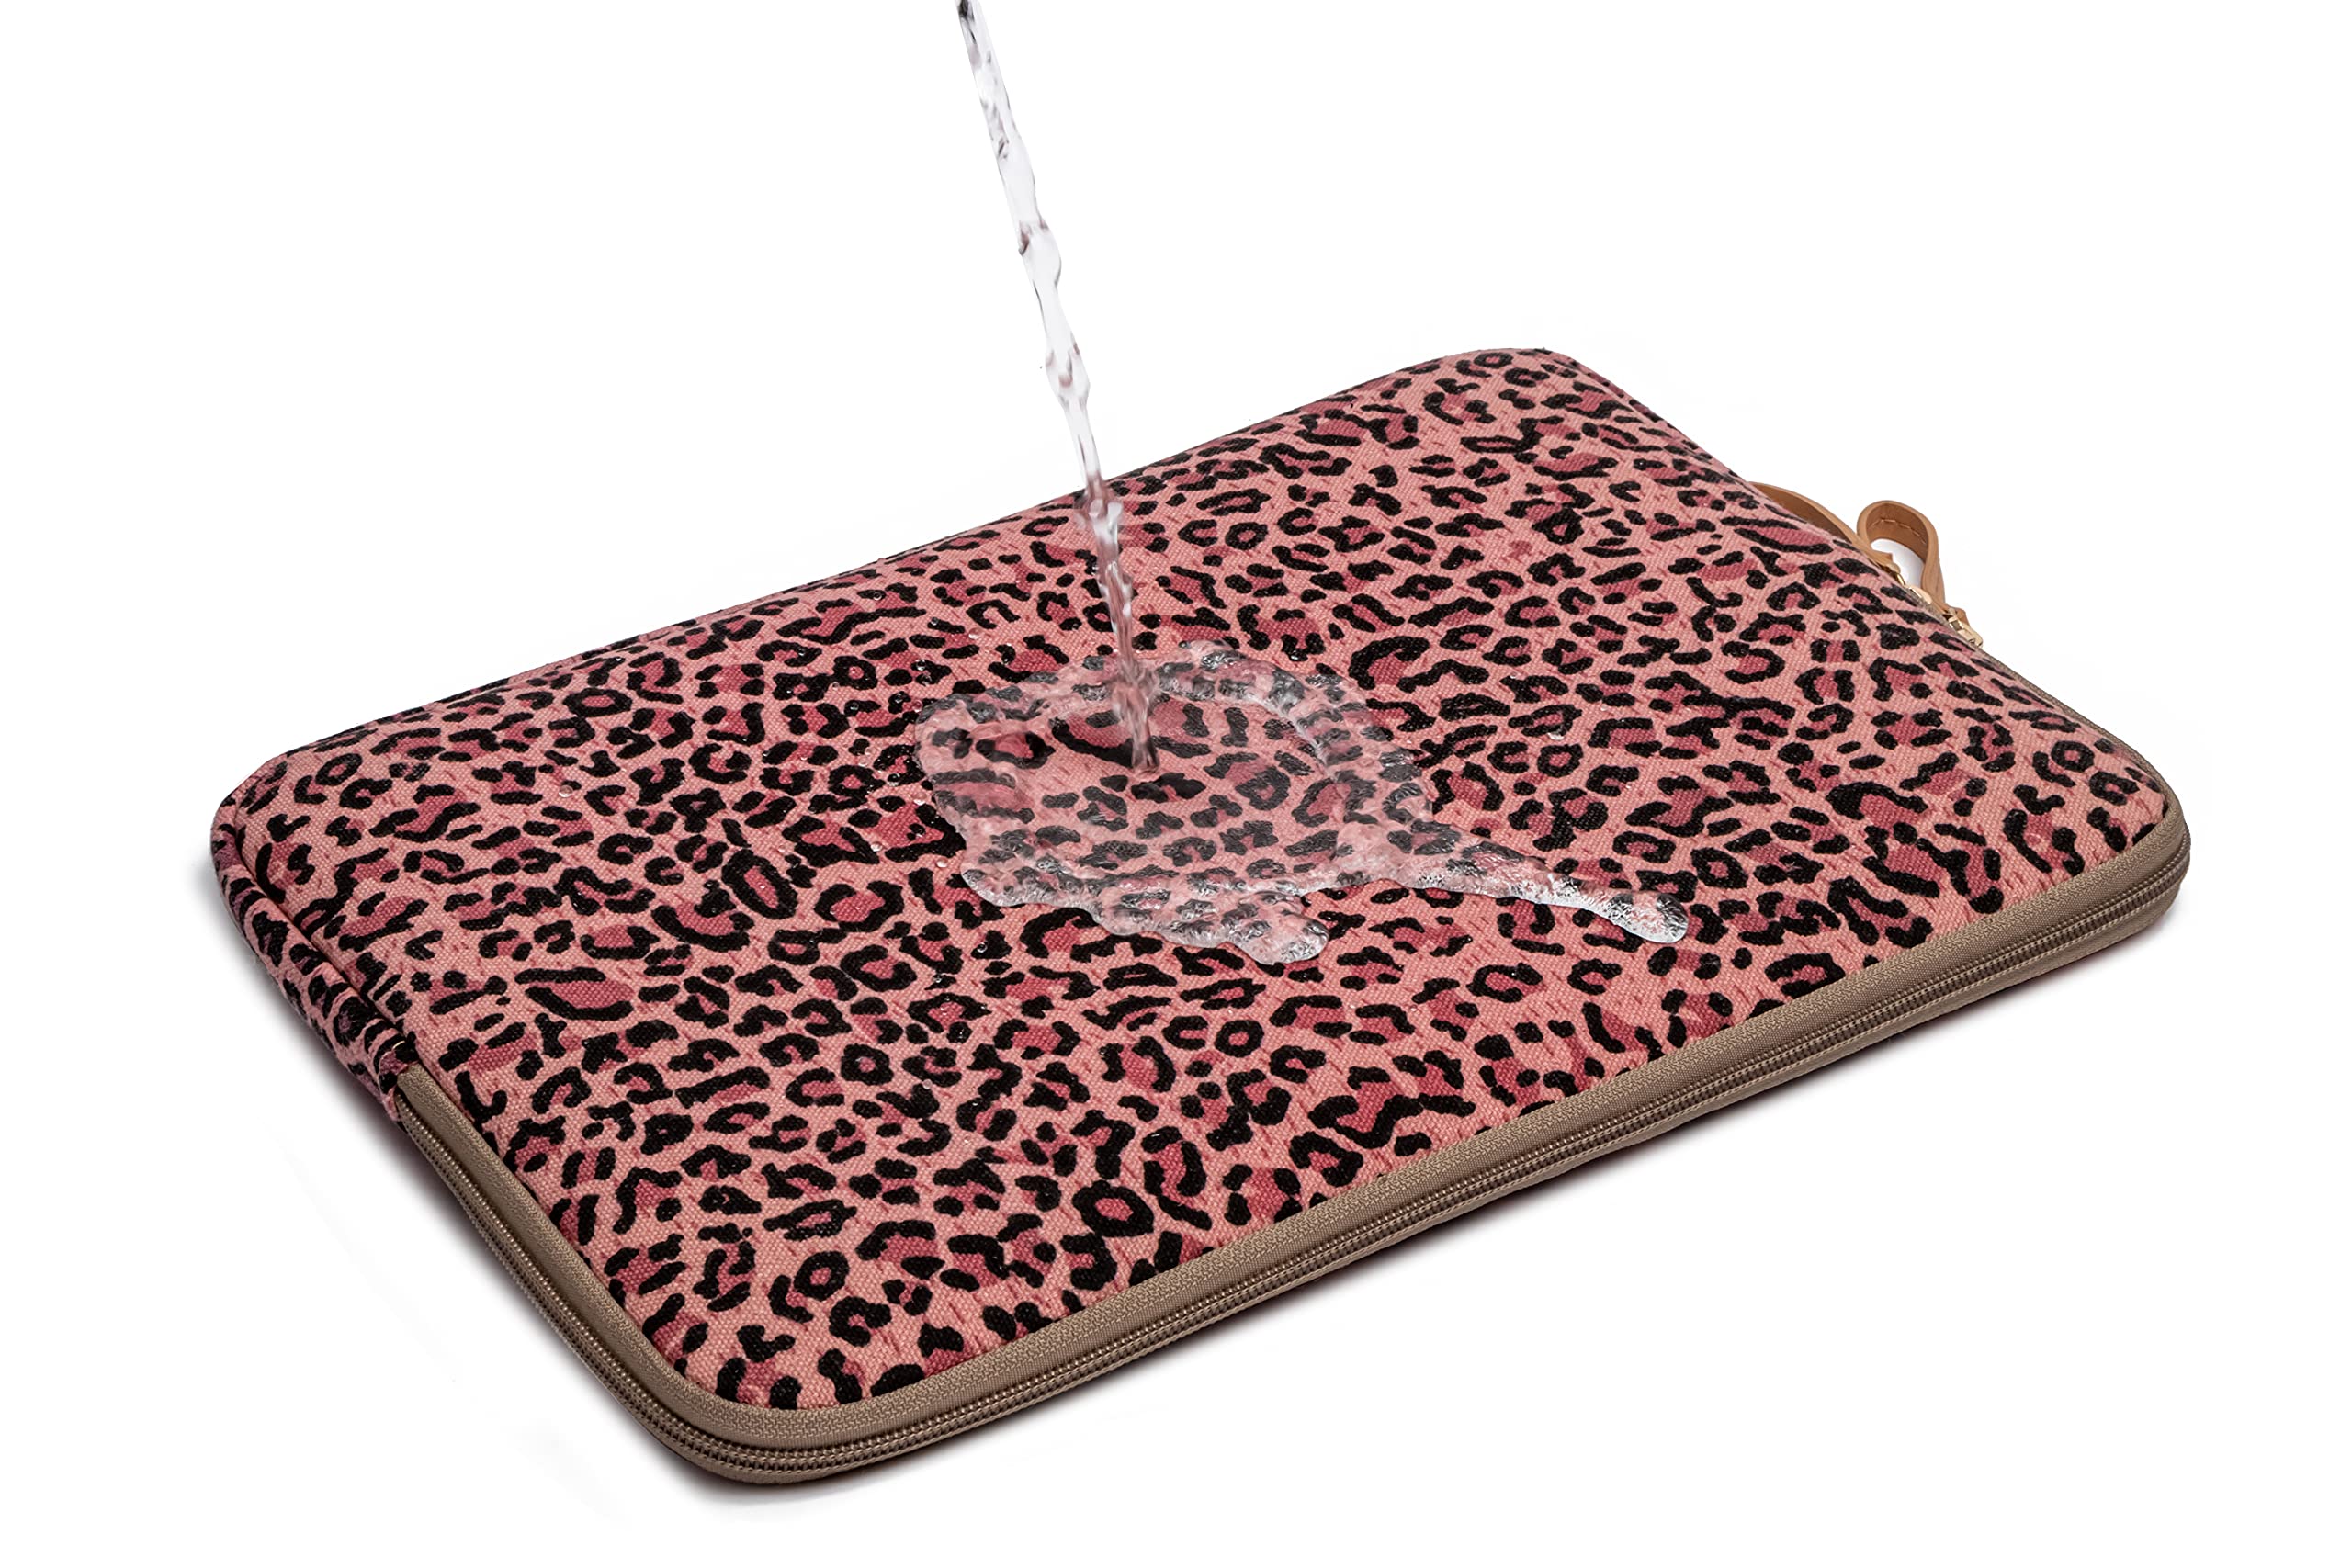 XSKN Leopard Spot Canvas Fabric Zipper Laptop Sleeve Case Cover for All 13 14 15 inch Computers, Bag MacBook Air Pro Retina Laptops Notebook (13 inch, for 13.3 Laptop), Pink